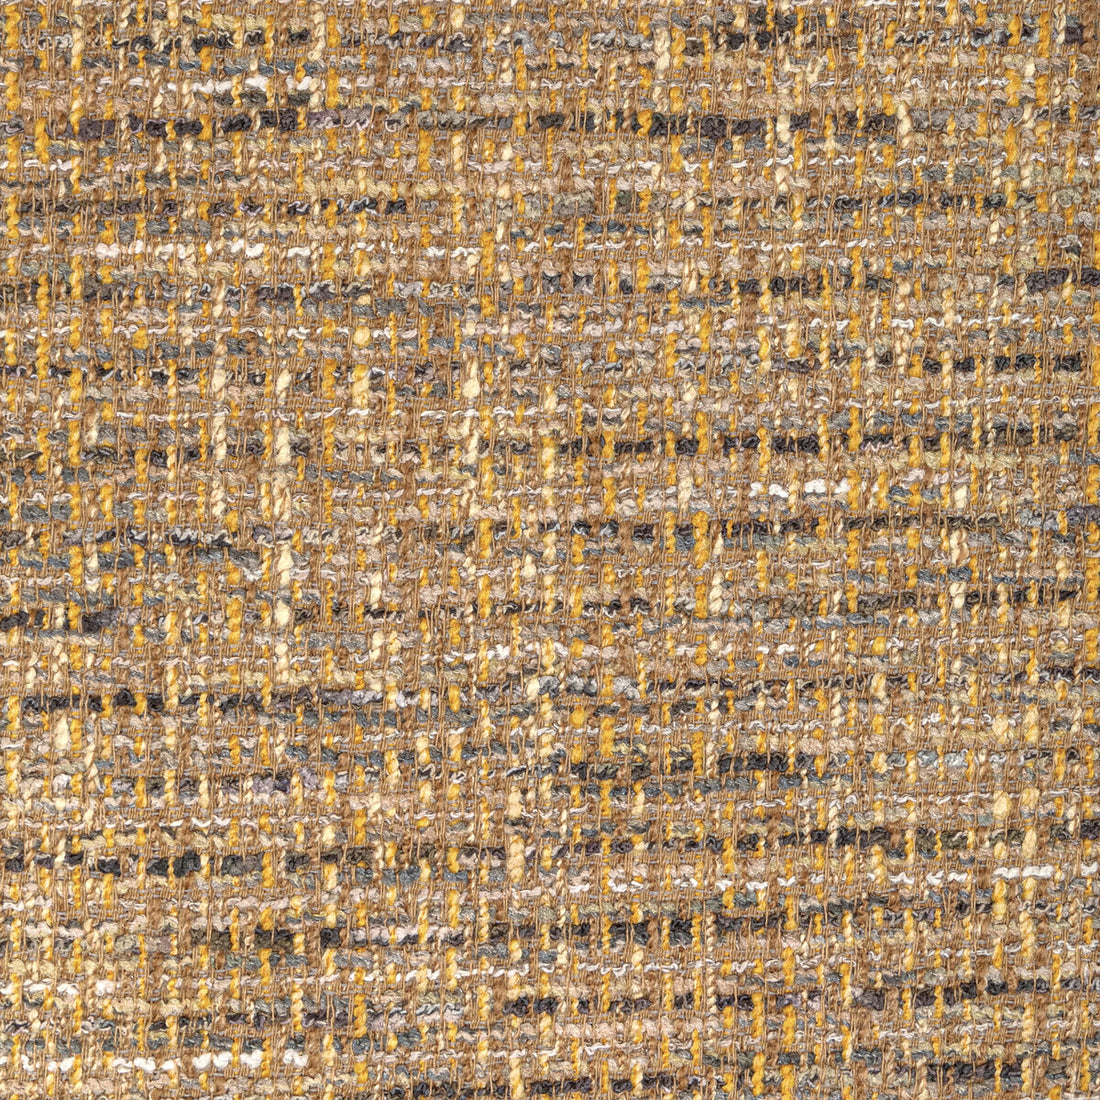 Salvadore fabric in amber color - pattern 36749.4.0 - by Kravet Contract in the Refined Textures Performance Crypton collection